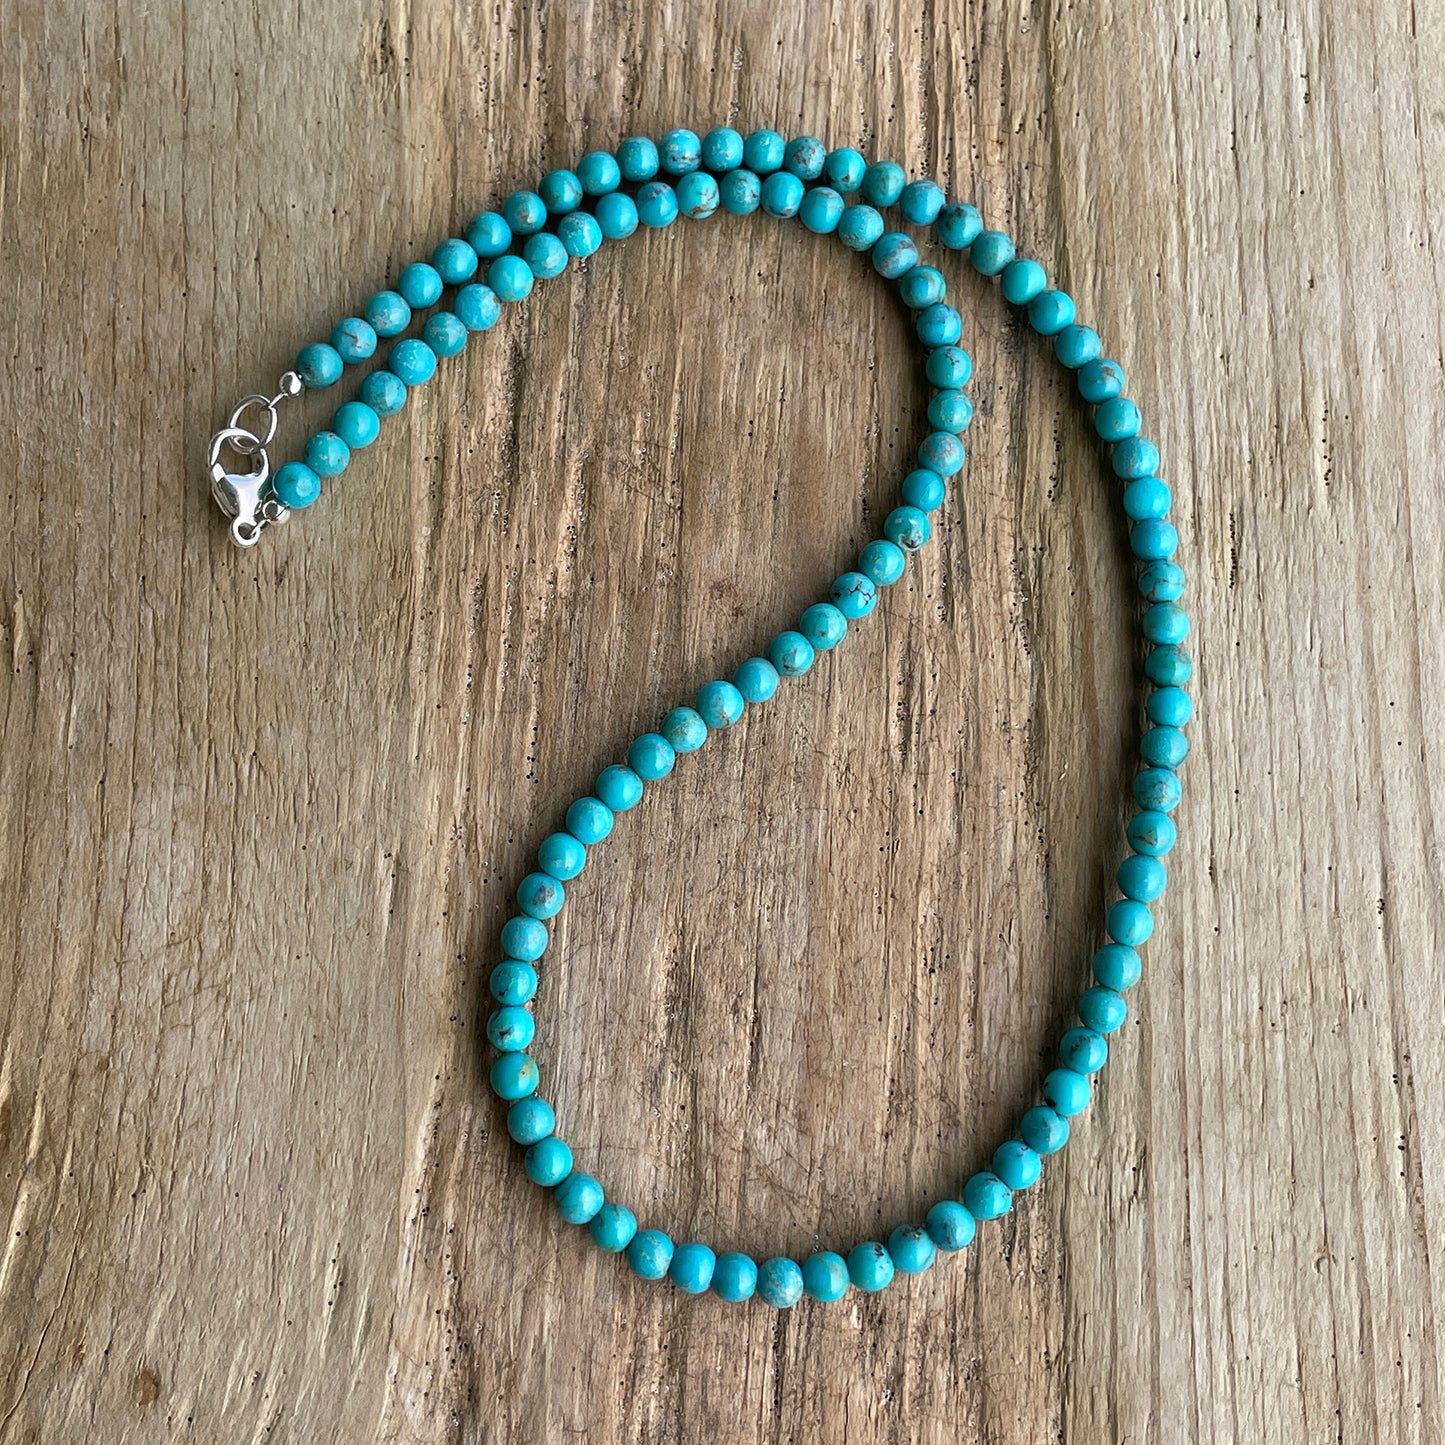 Genuine 4mm Light Blue Turquoise Bead Necklace